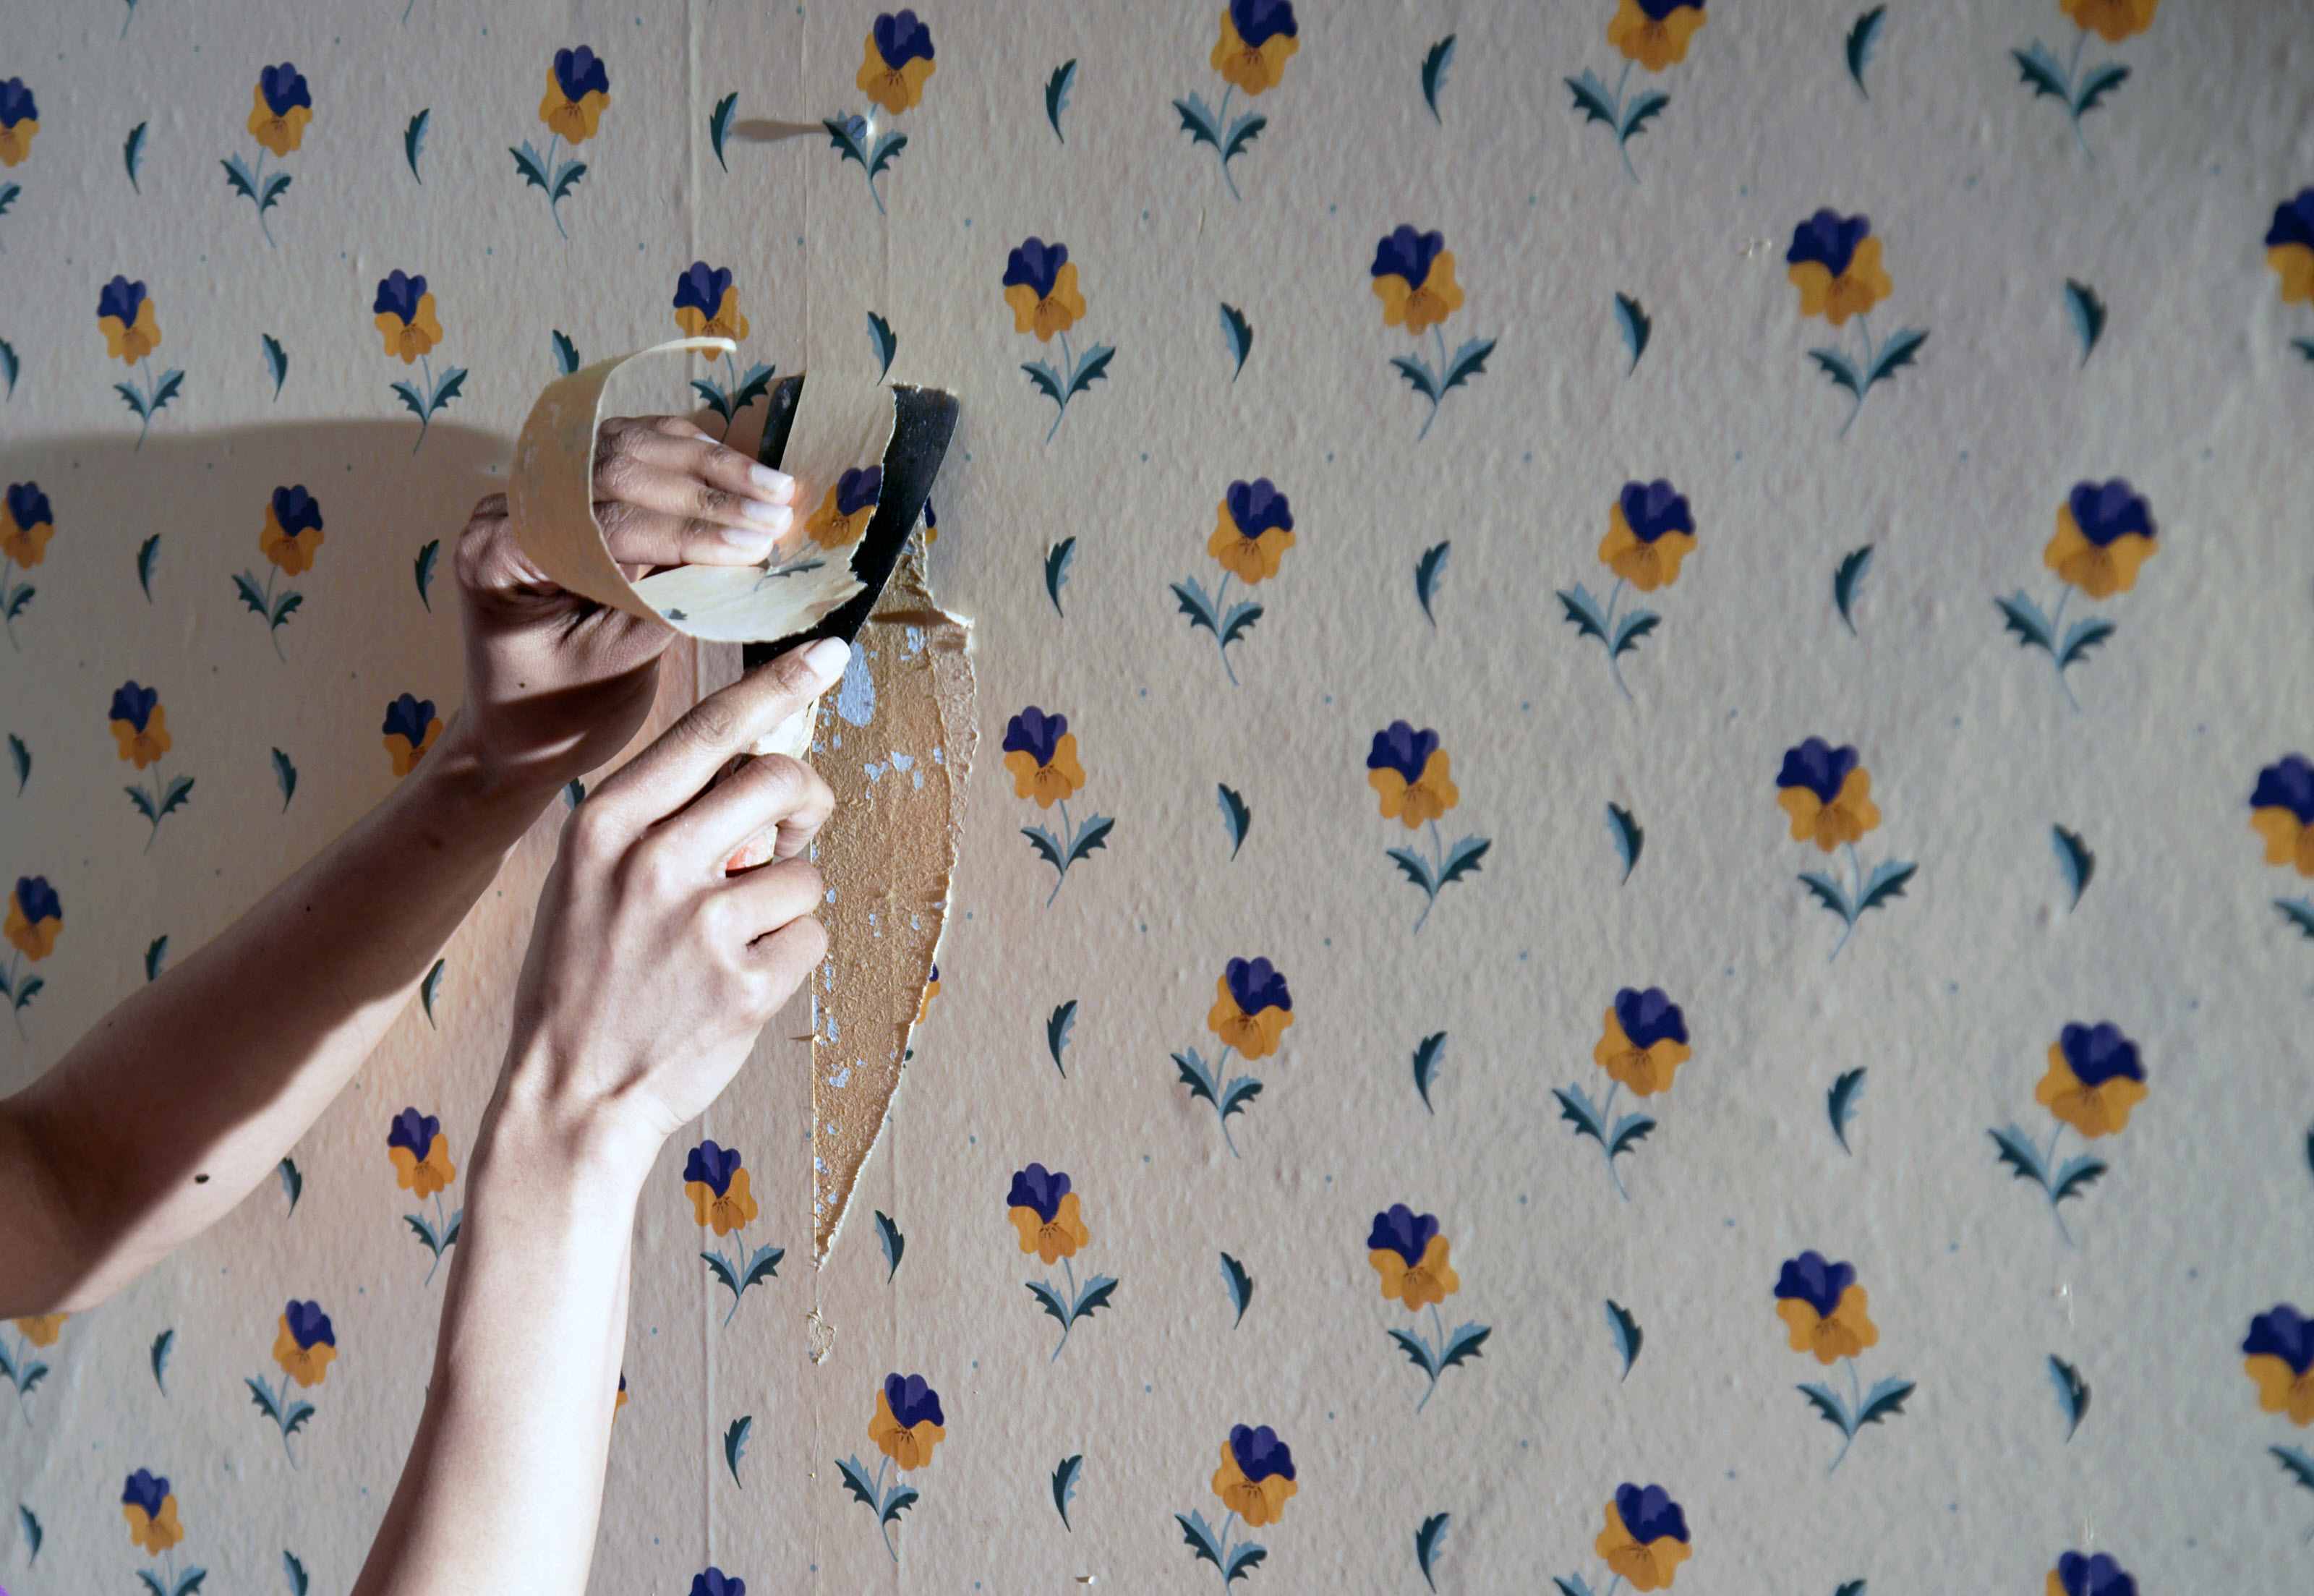 How to Properly Remove Wallpaper - Walls By Design